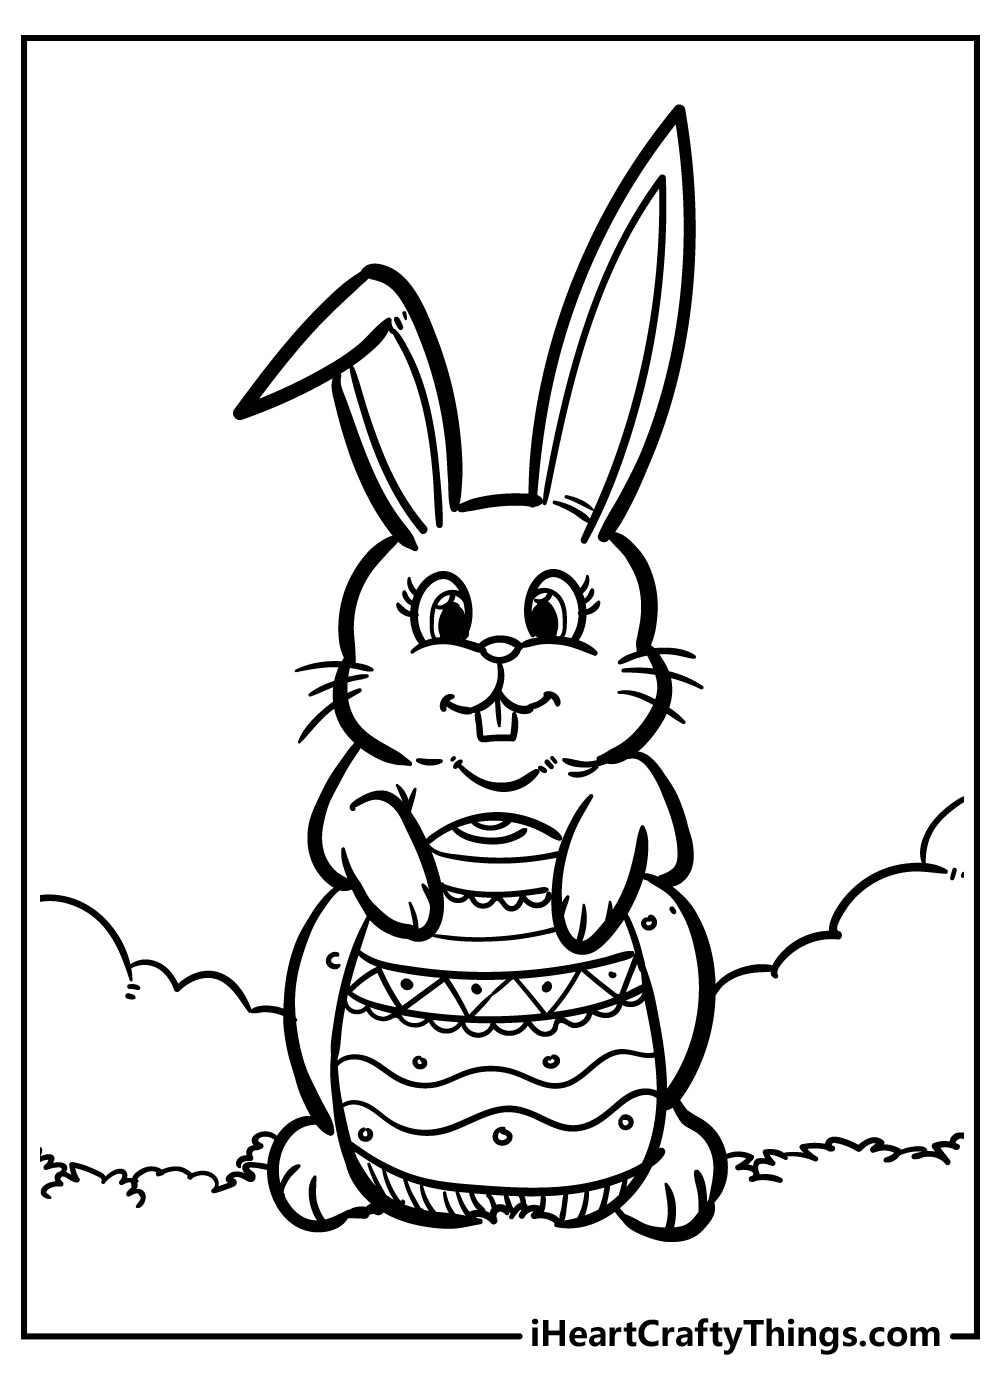 Easter egg coloring pages free pdf download